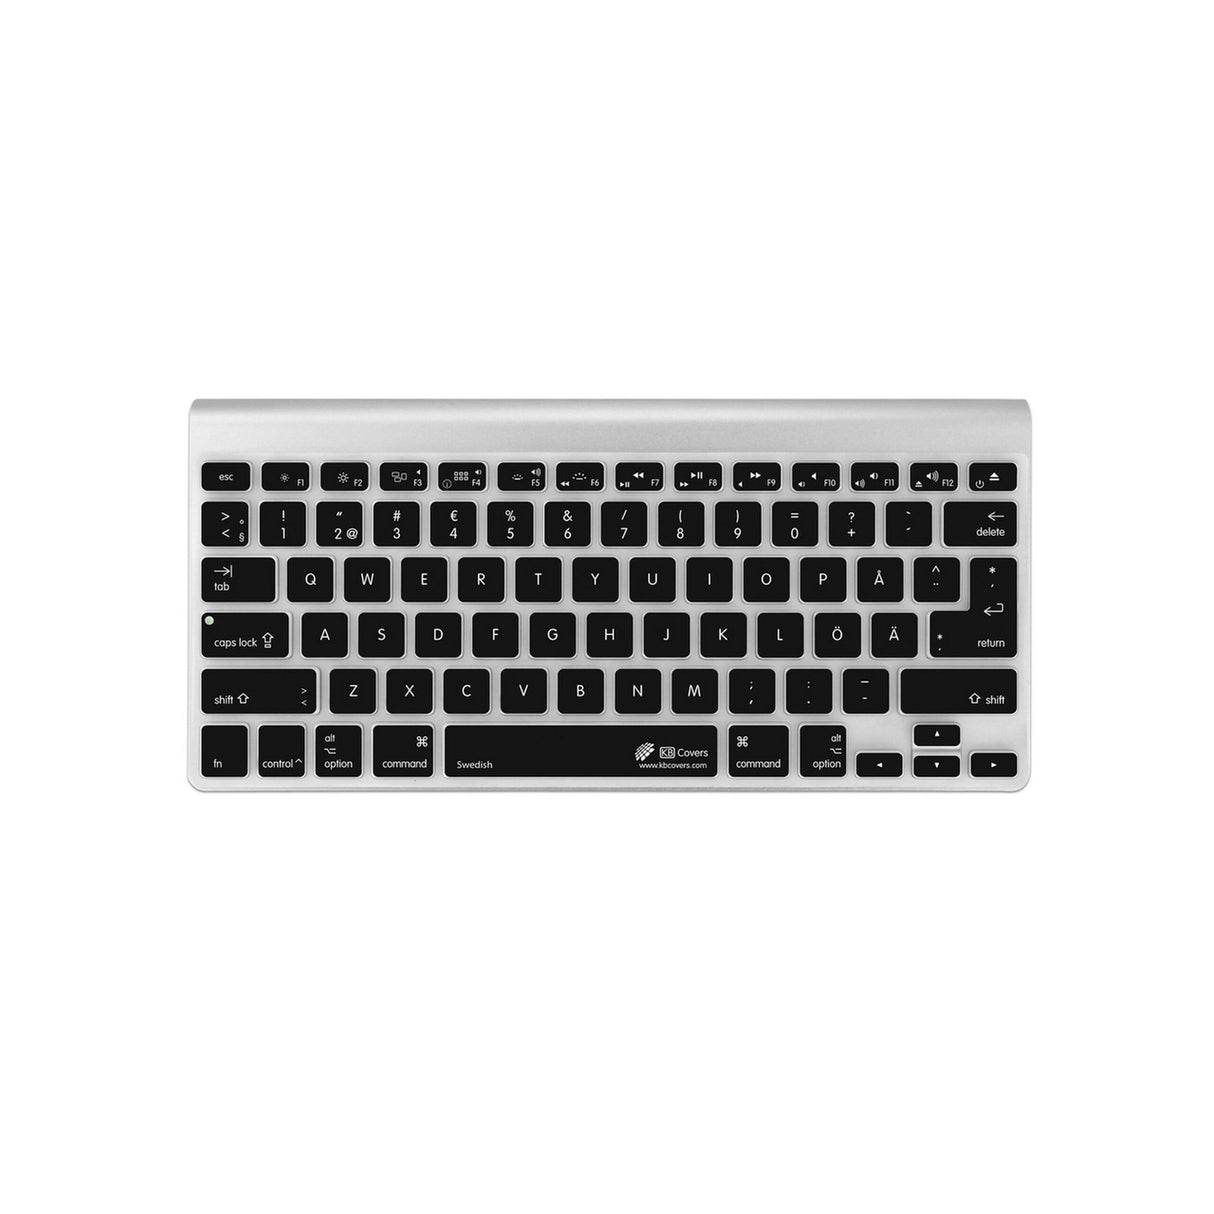 KB Covers SWED-M-CB-2 Swedish Keyboard Cover for MacBook/Air 13/Pro 2008+/Retina and Wireless